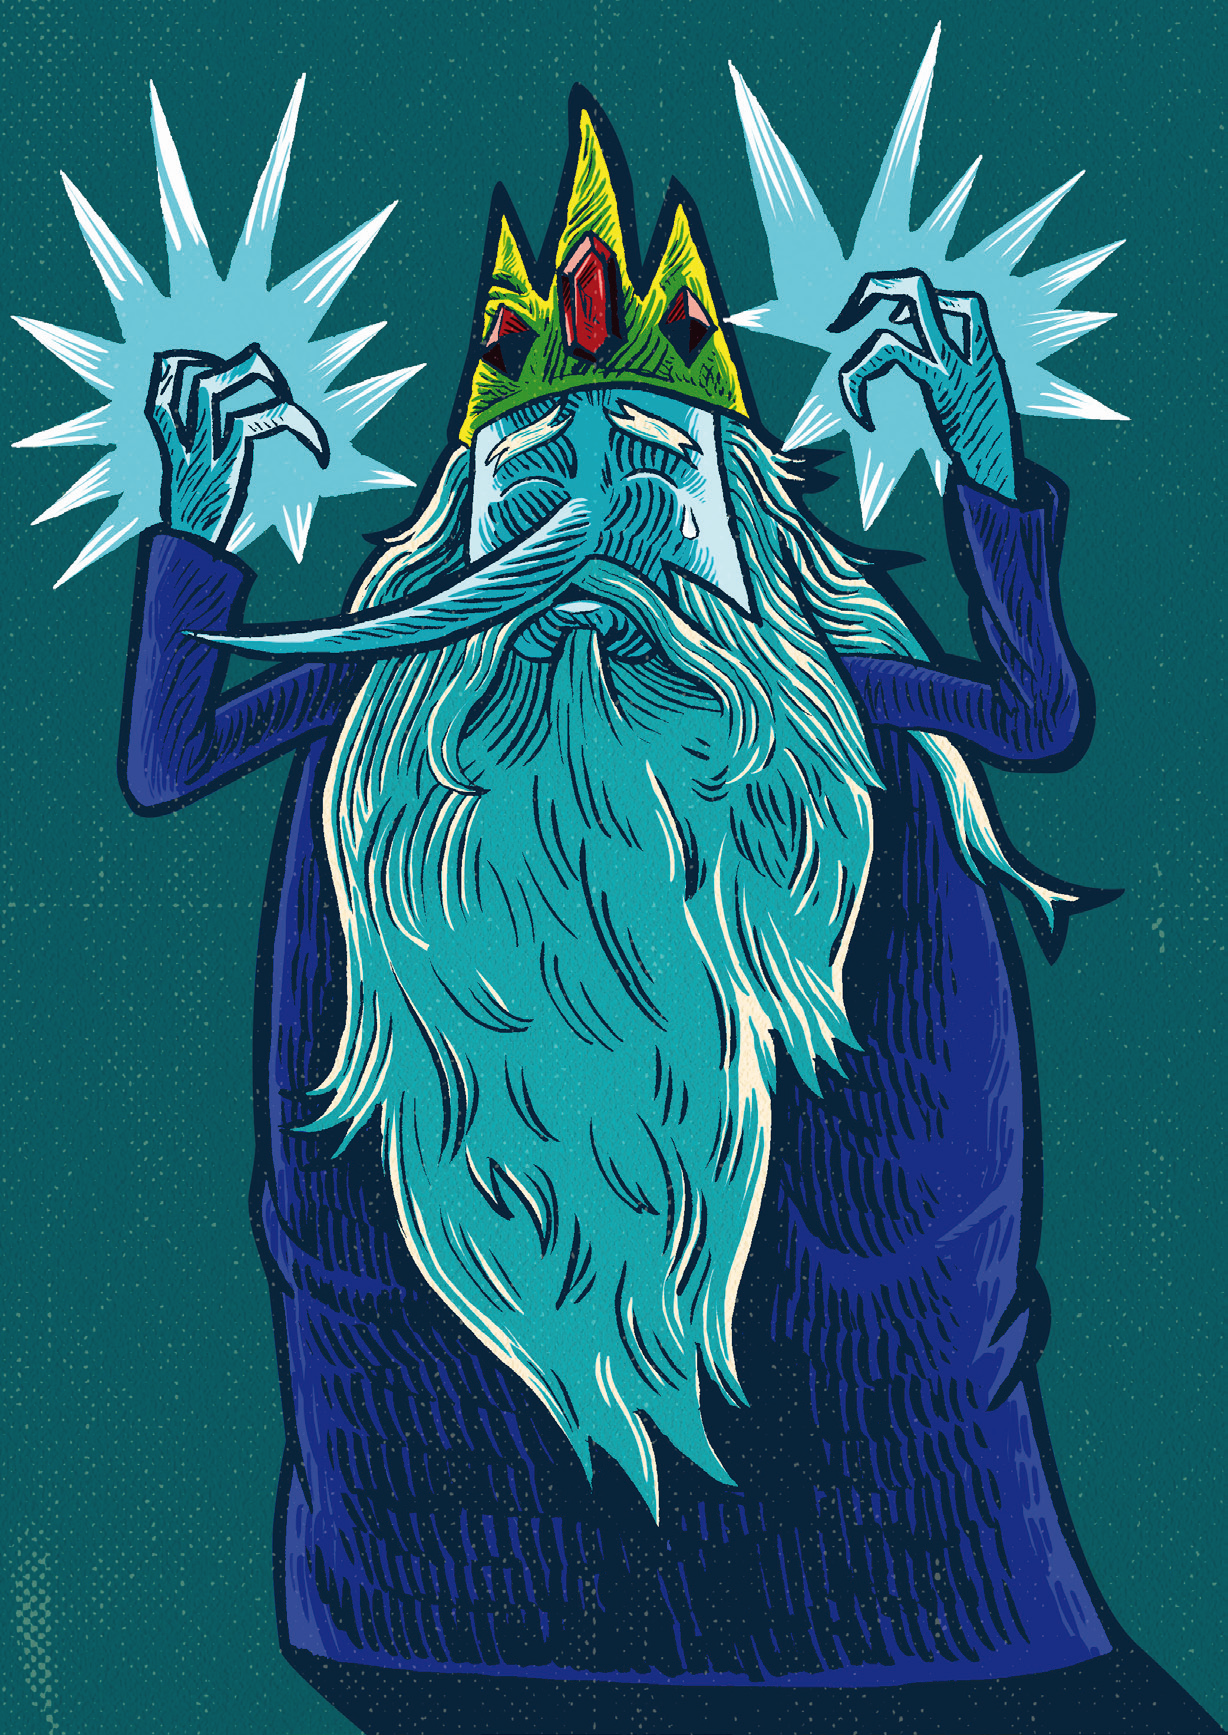 2D Ice King Character Illustration